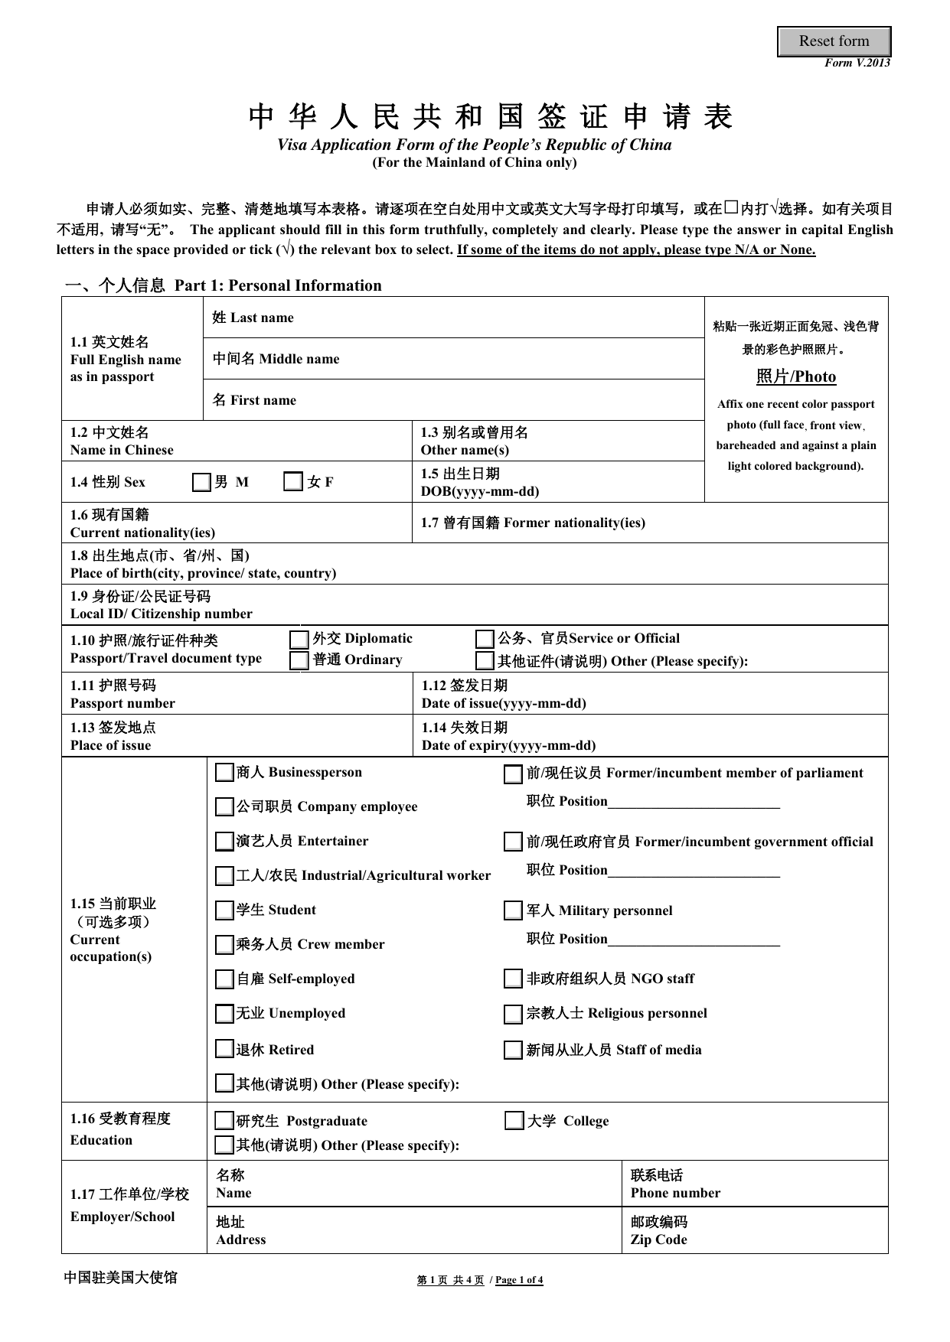 Visa Application Form of the Peoples Republic of China - Embassy of the Peoples Republic of China (English/Chinese), Page 1